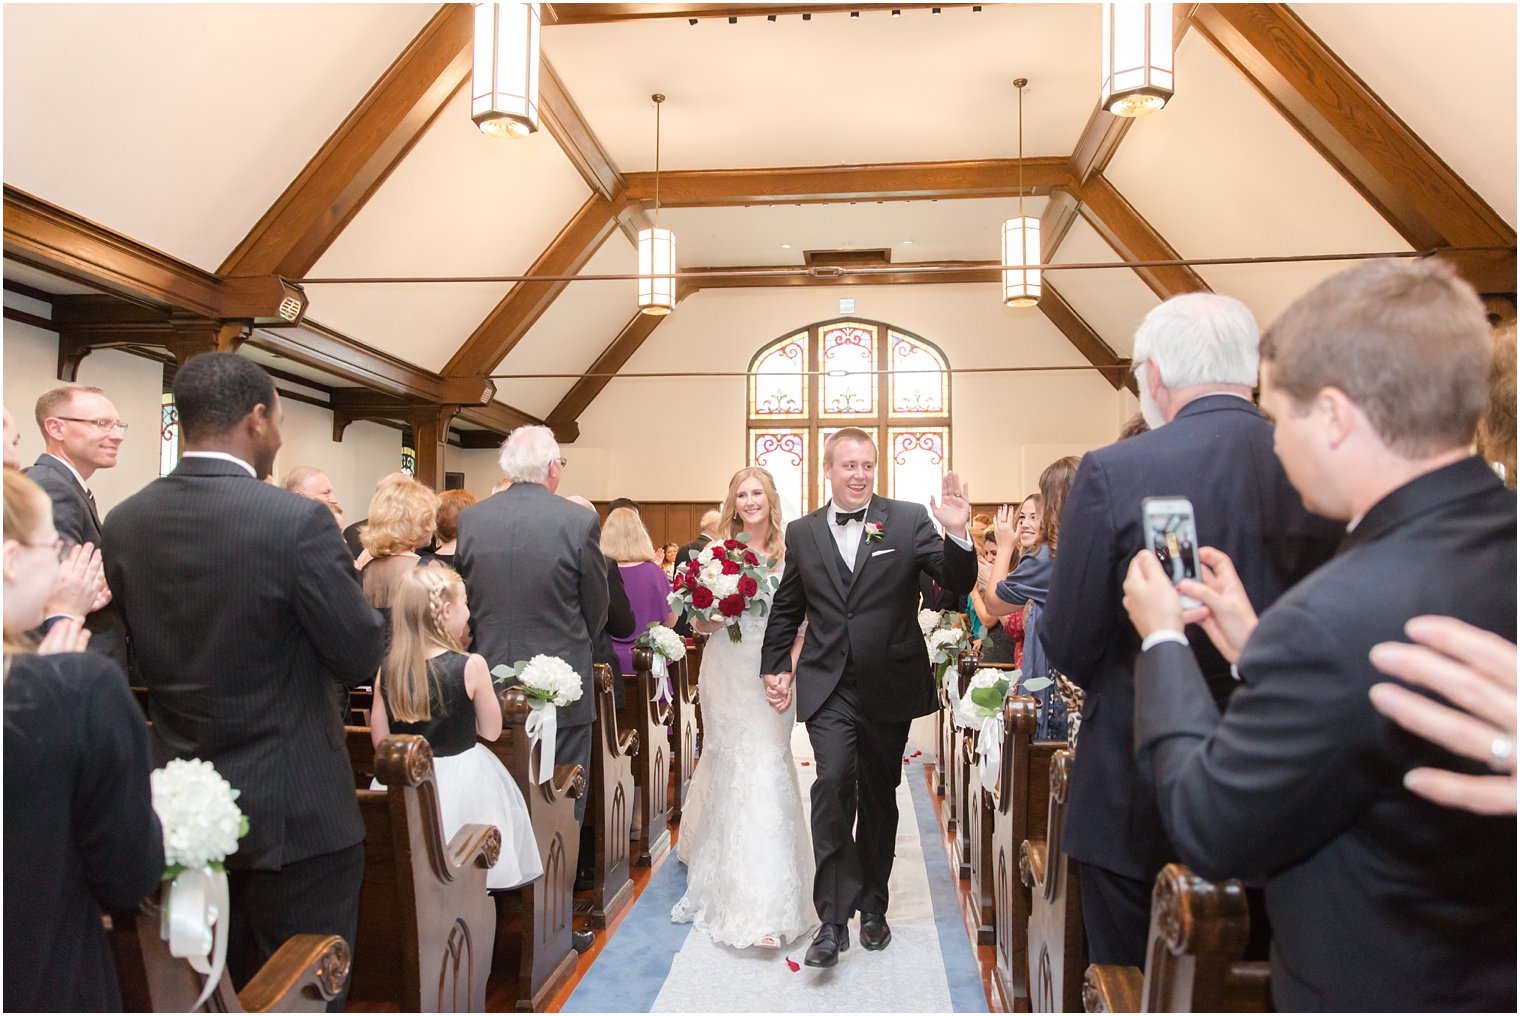 Recessional of bride and groom at Hopewell Presbyterian Church Wedding Ceremony